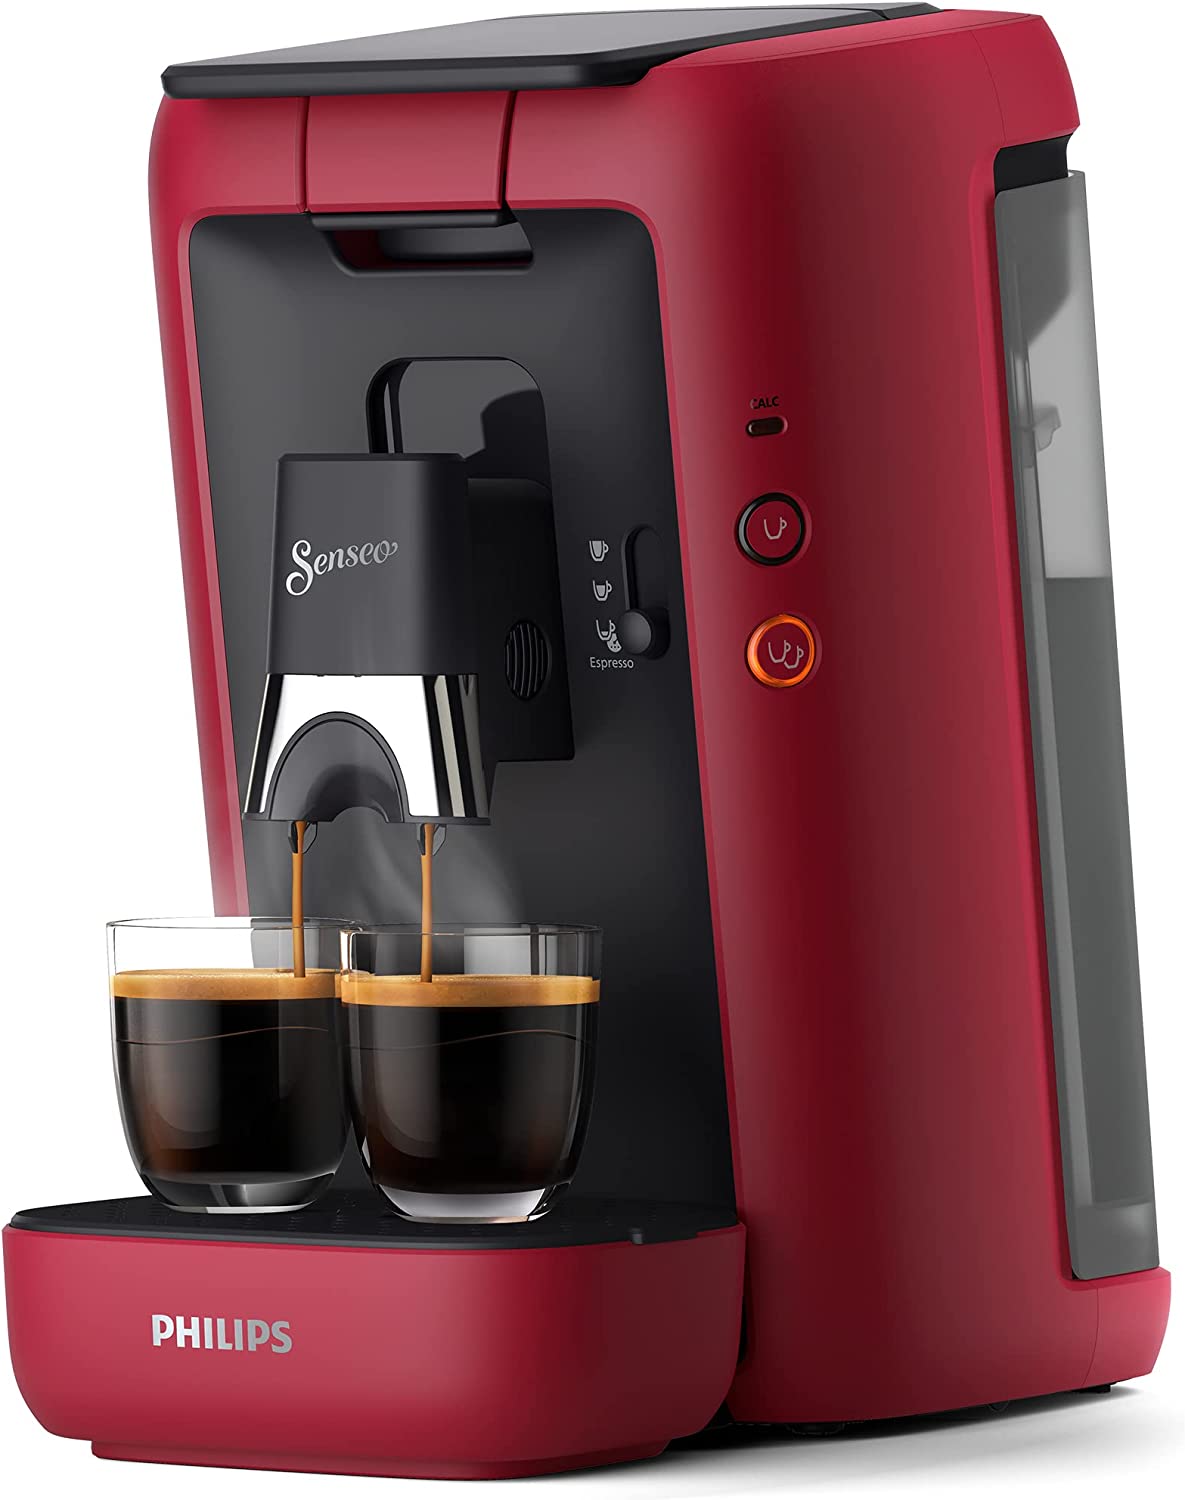 Philips Domestic Appliances CSA260/91 Senseo Maestro Coffee Machine Coffee Pods With 1.2 Litre Water Tank, Choice of Intensity and Memo Function, Product Green, Color: Red